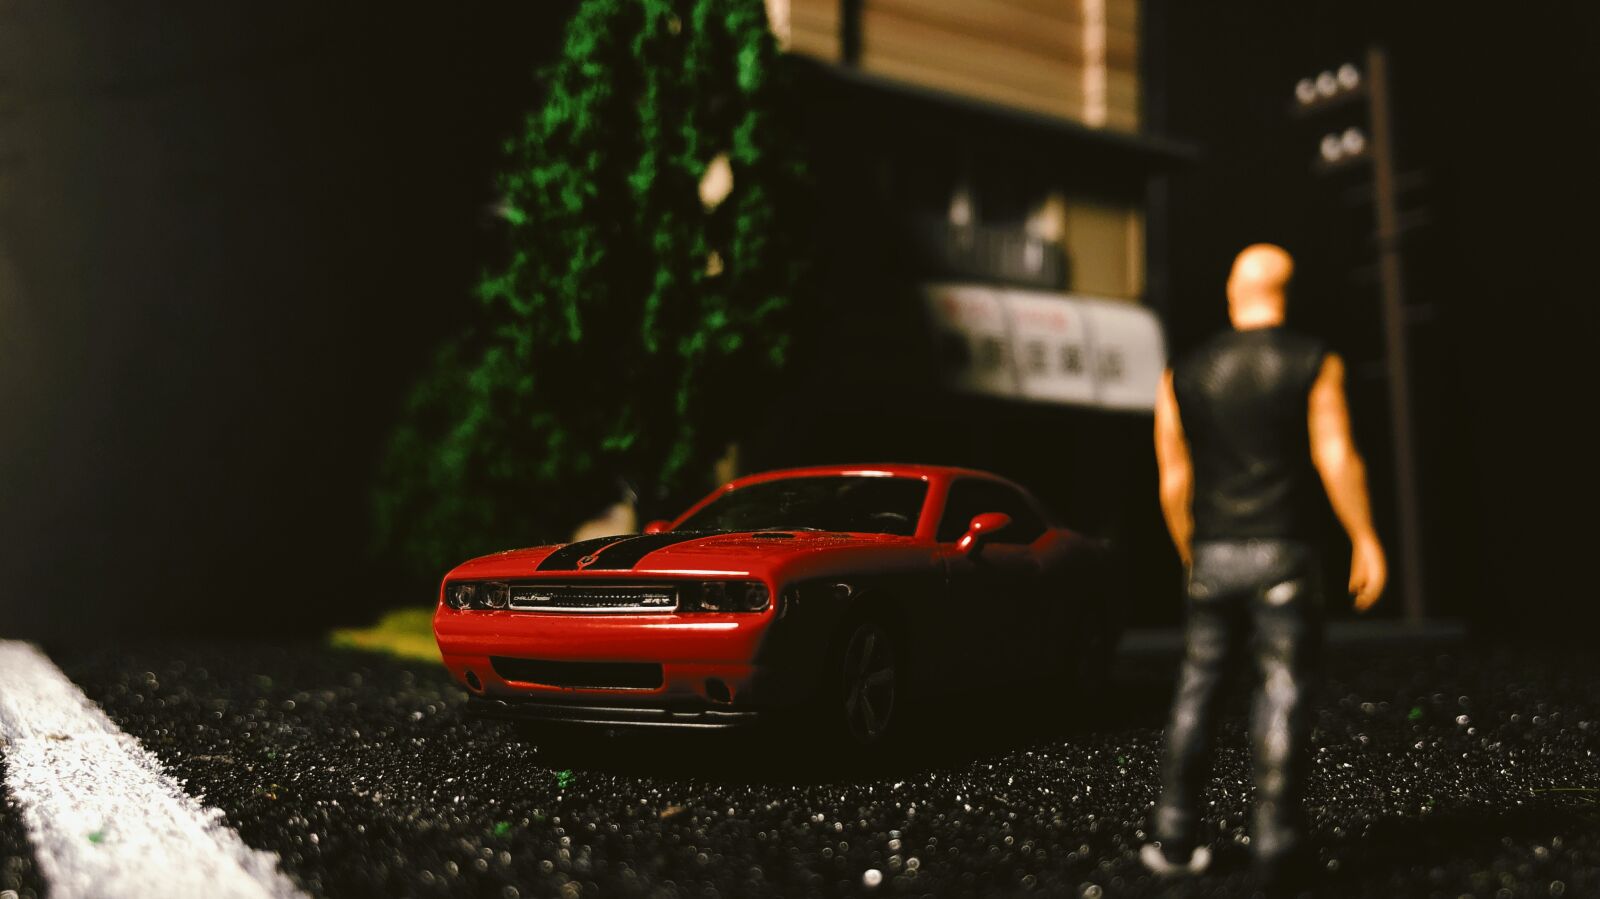 Apple iPhone X + iPhone X back camera 4mm f/1.8 sample photo. Dodge, challenger, kyosho photography